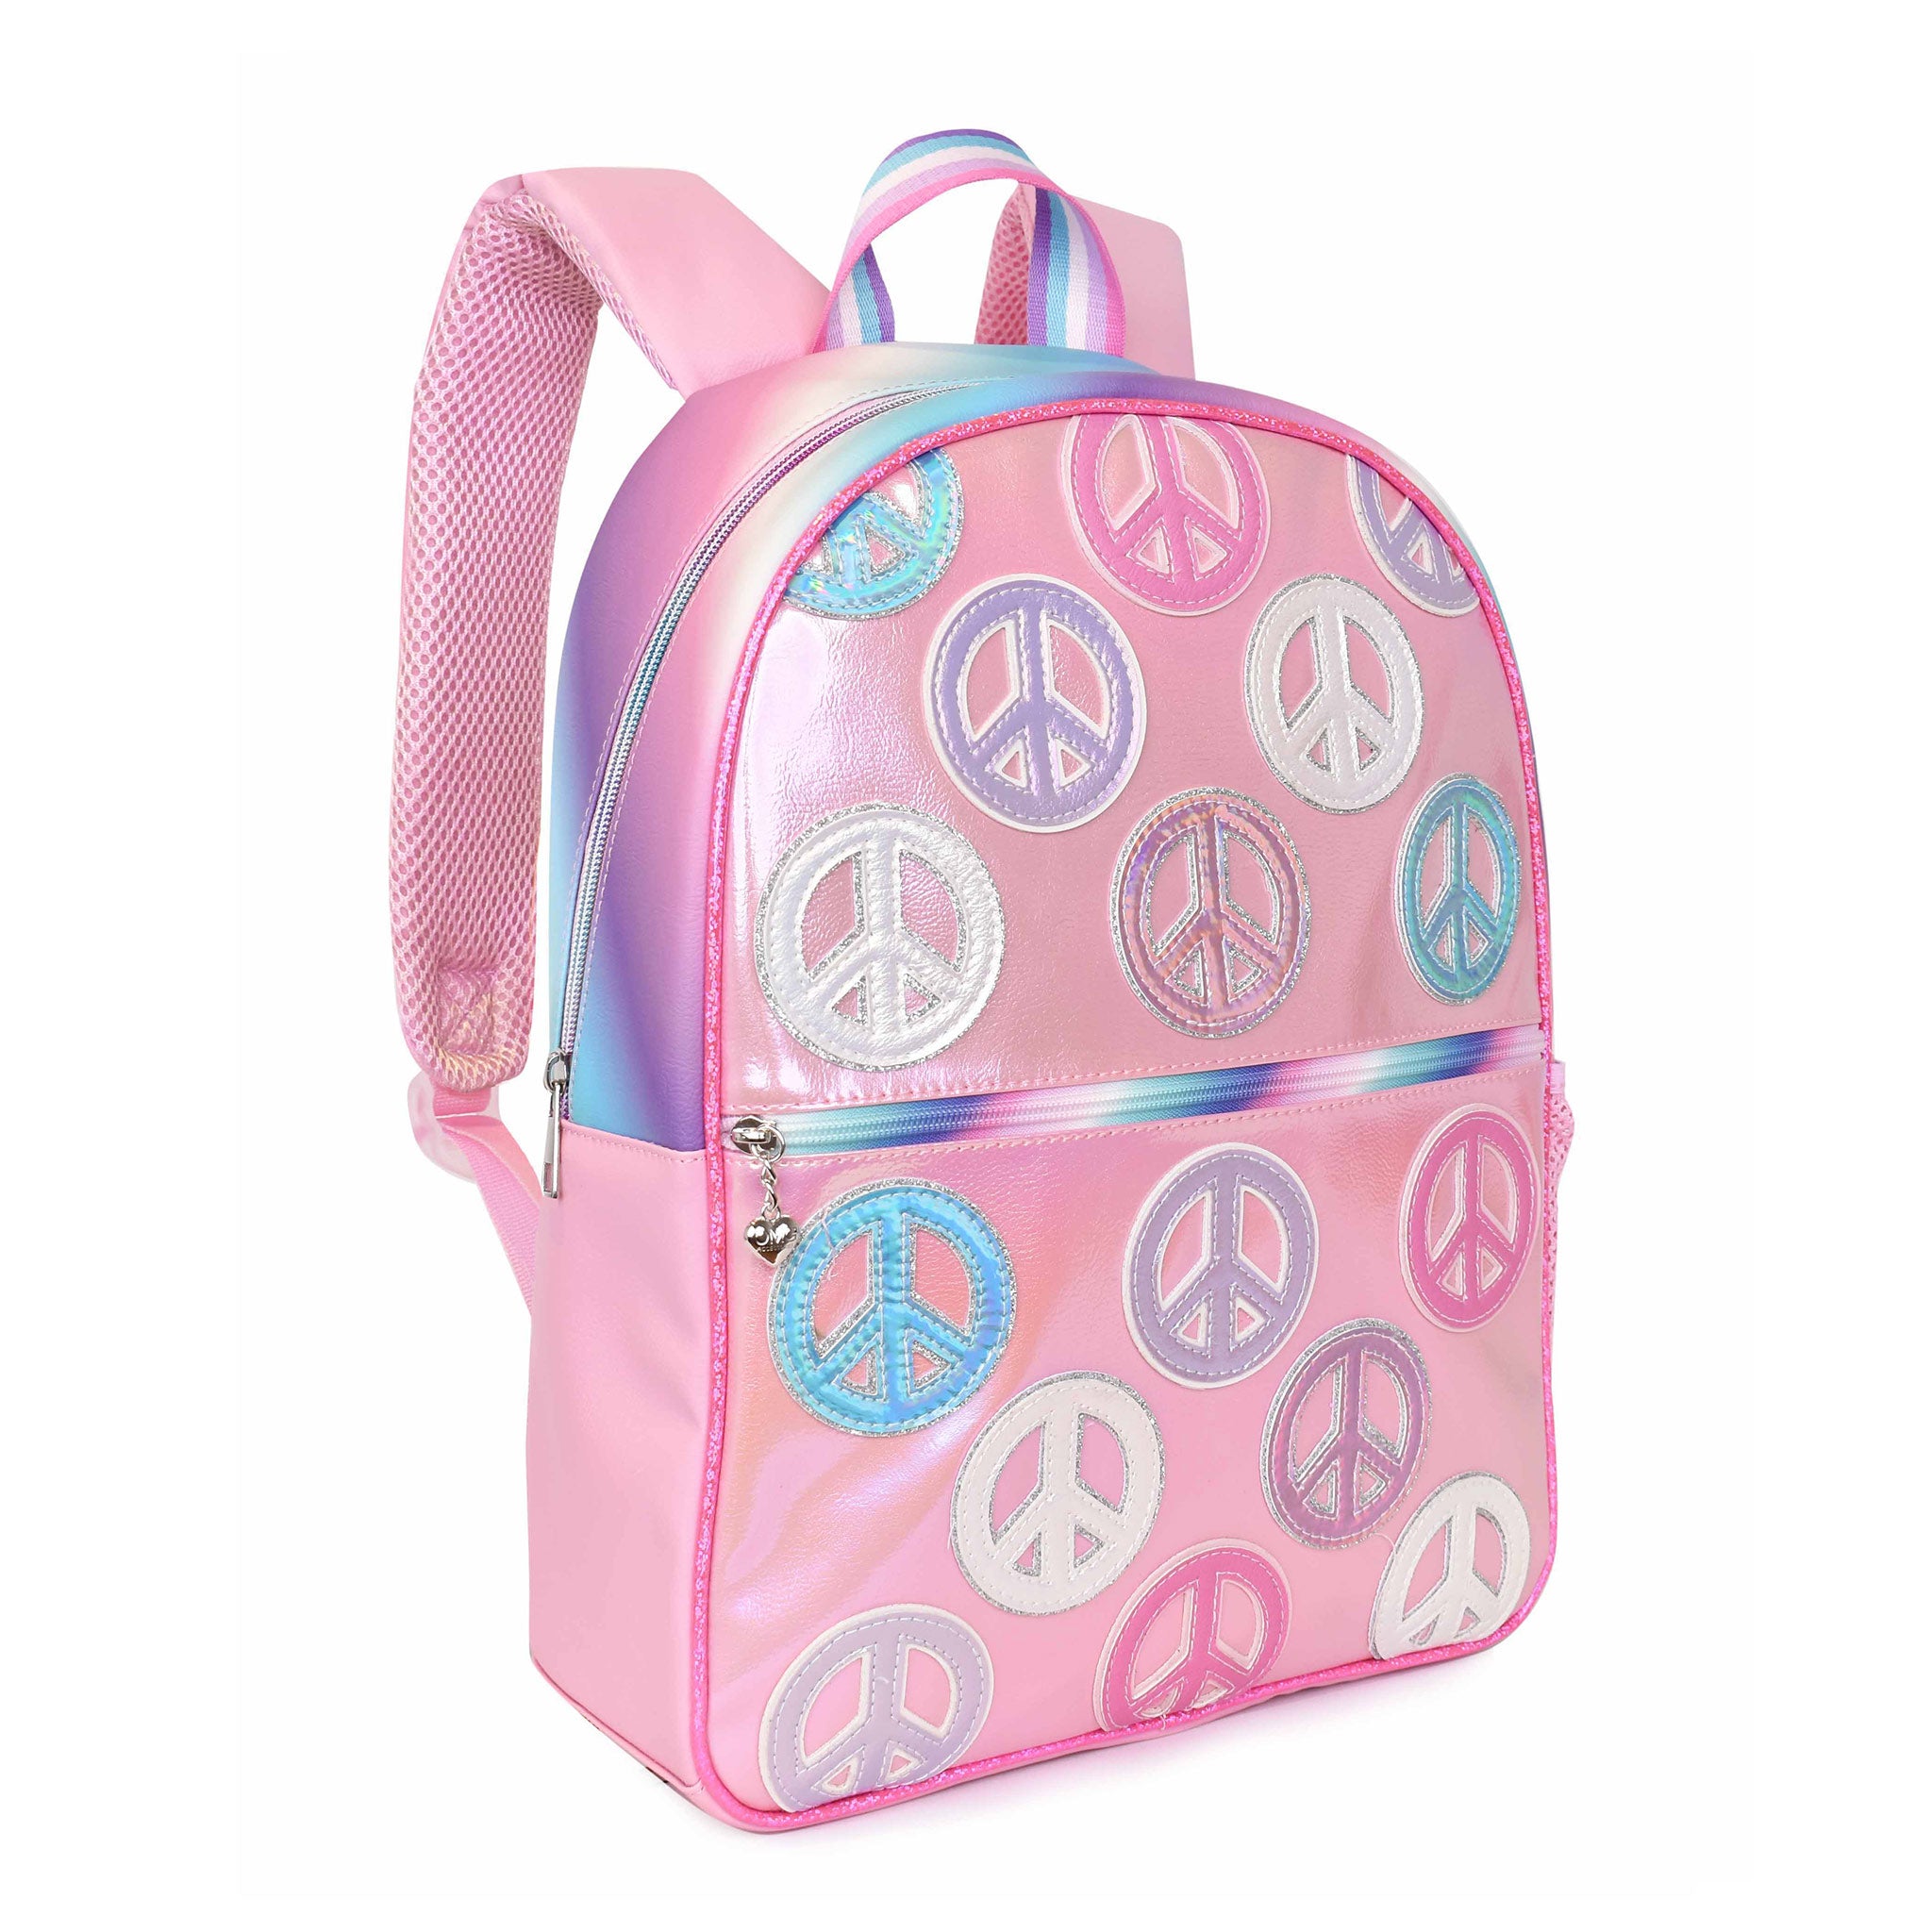 Side  view of a metallic pink large backpack with peace signs and a clear pencil pouch with 'STUFF' lettering